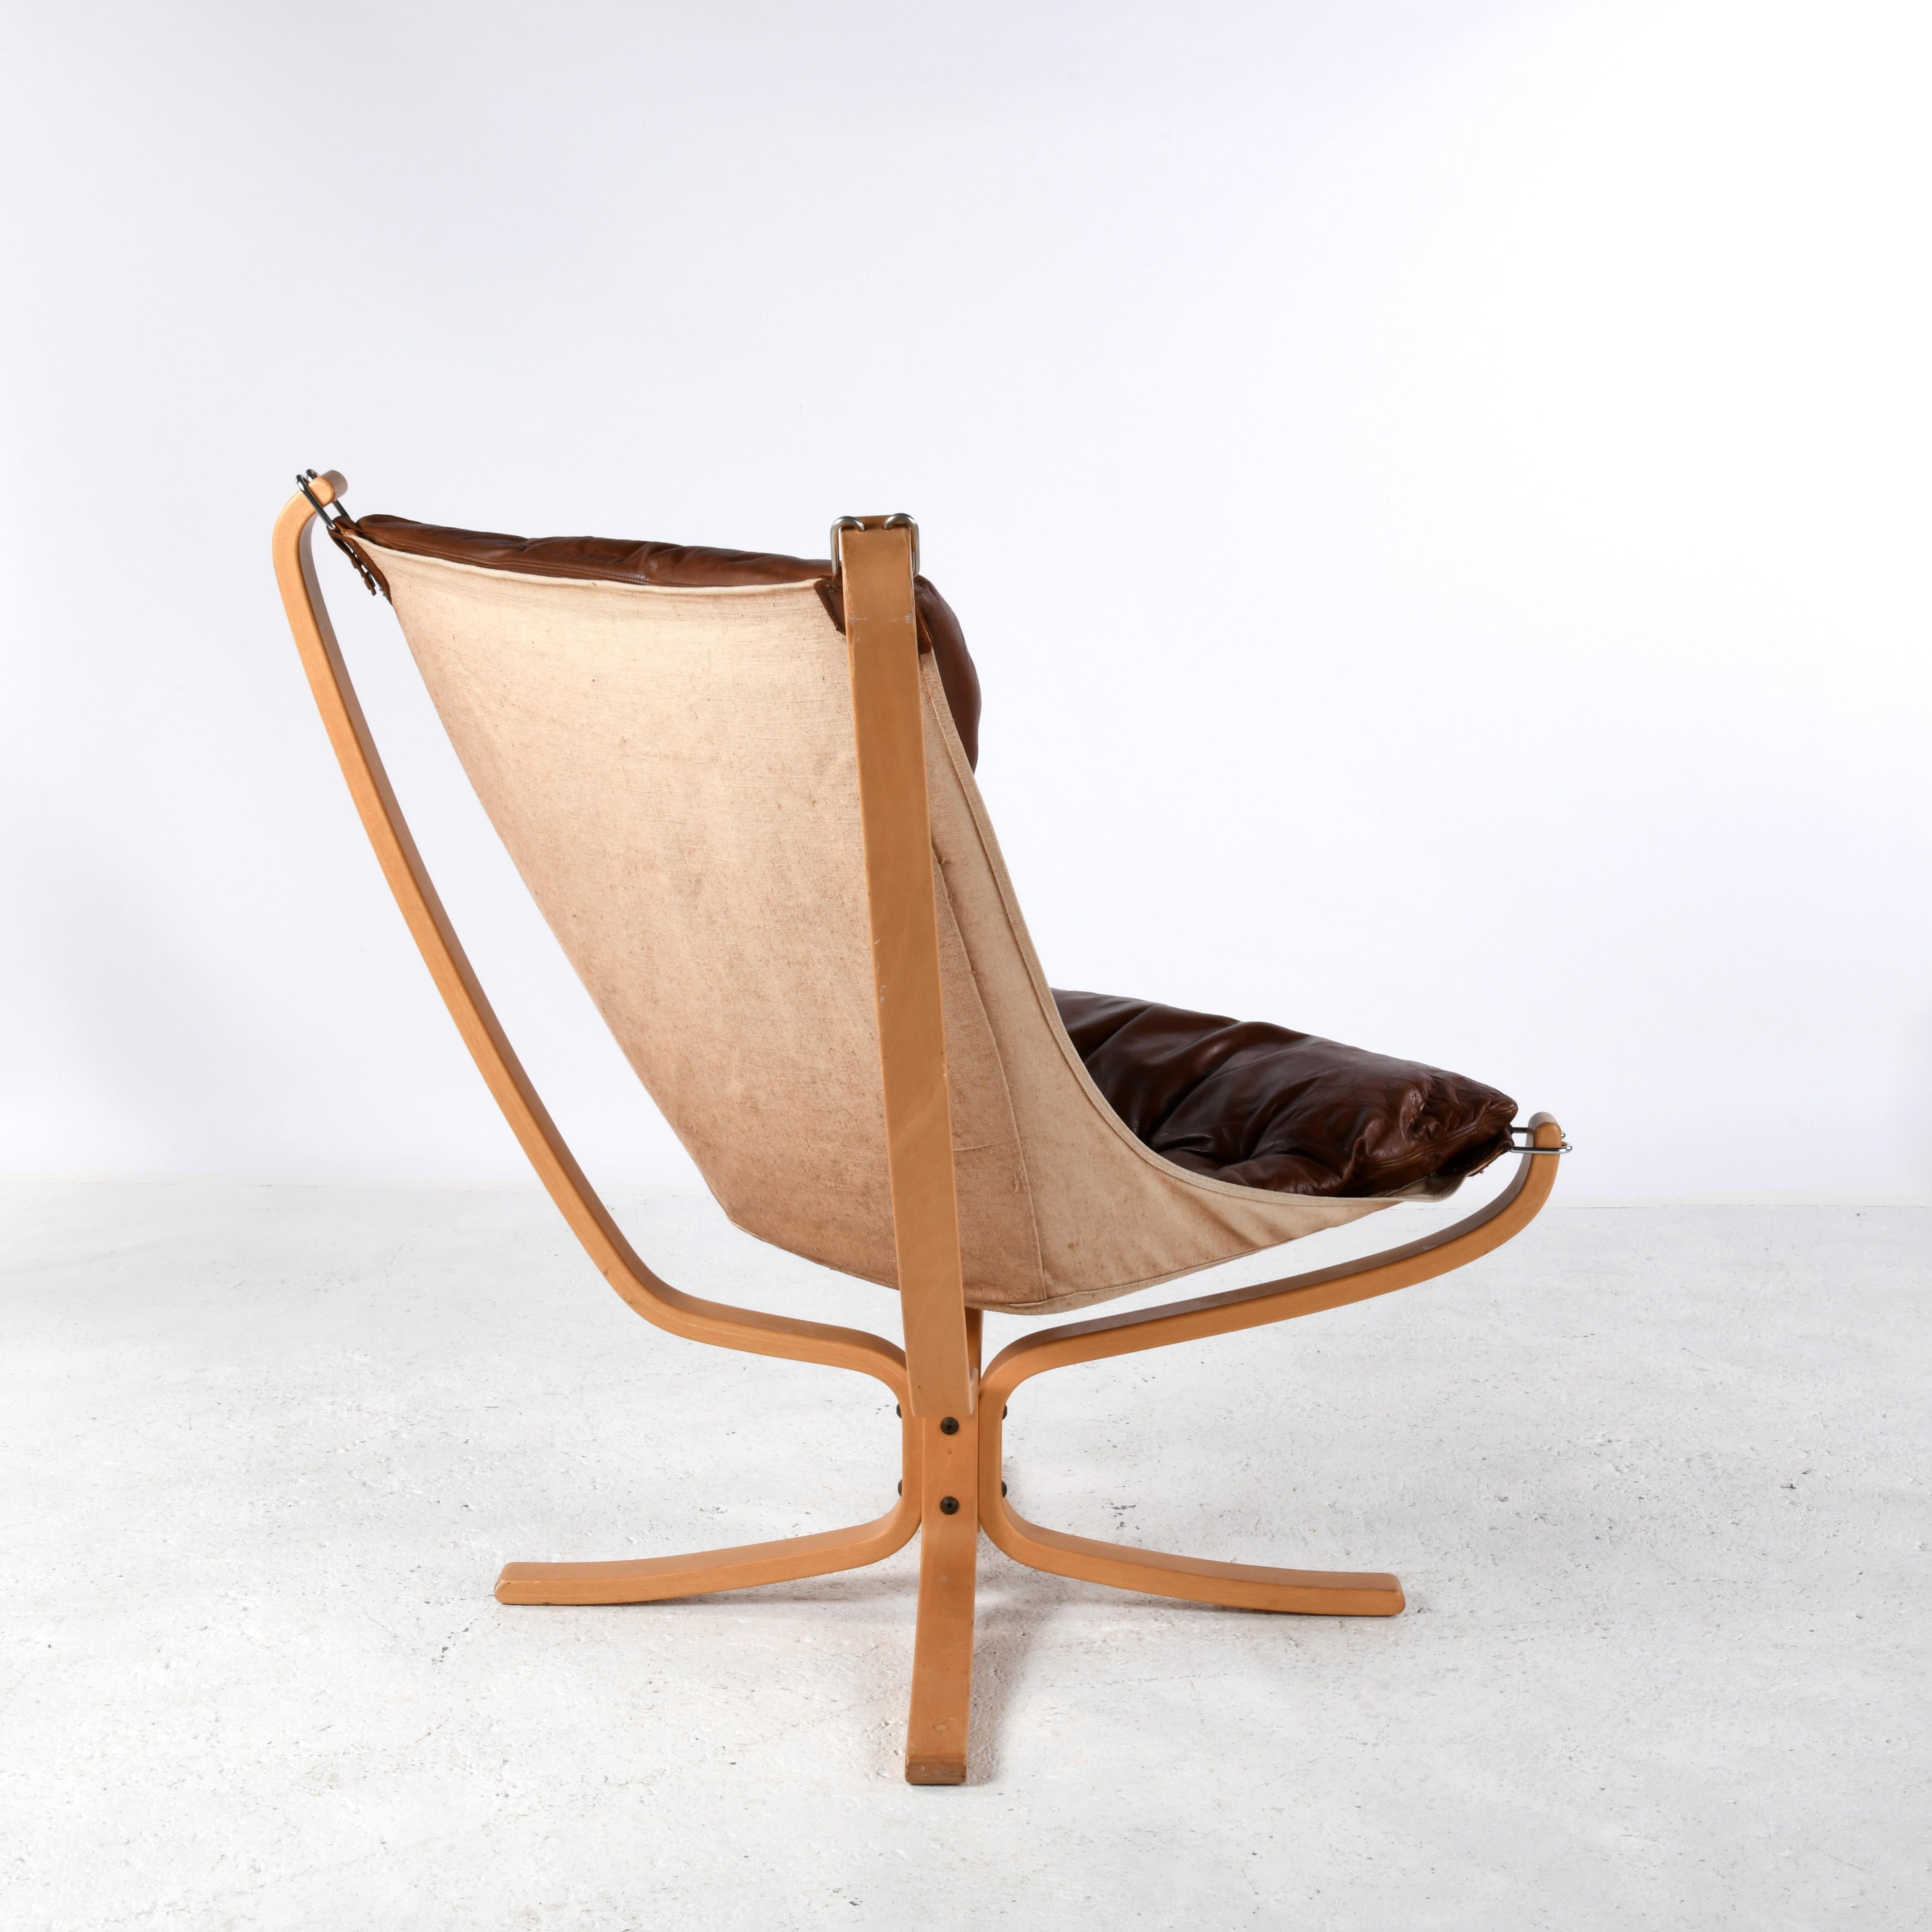 Scandinavian Modern Falcon chair, design Sigurd Ressell, wood and brown leather version